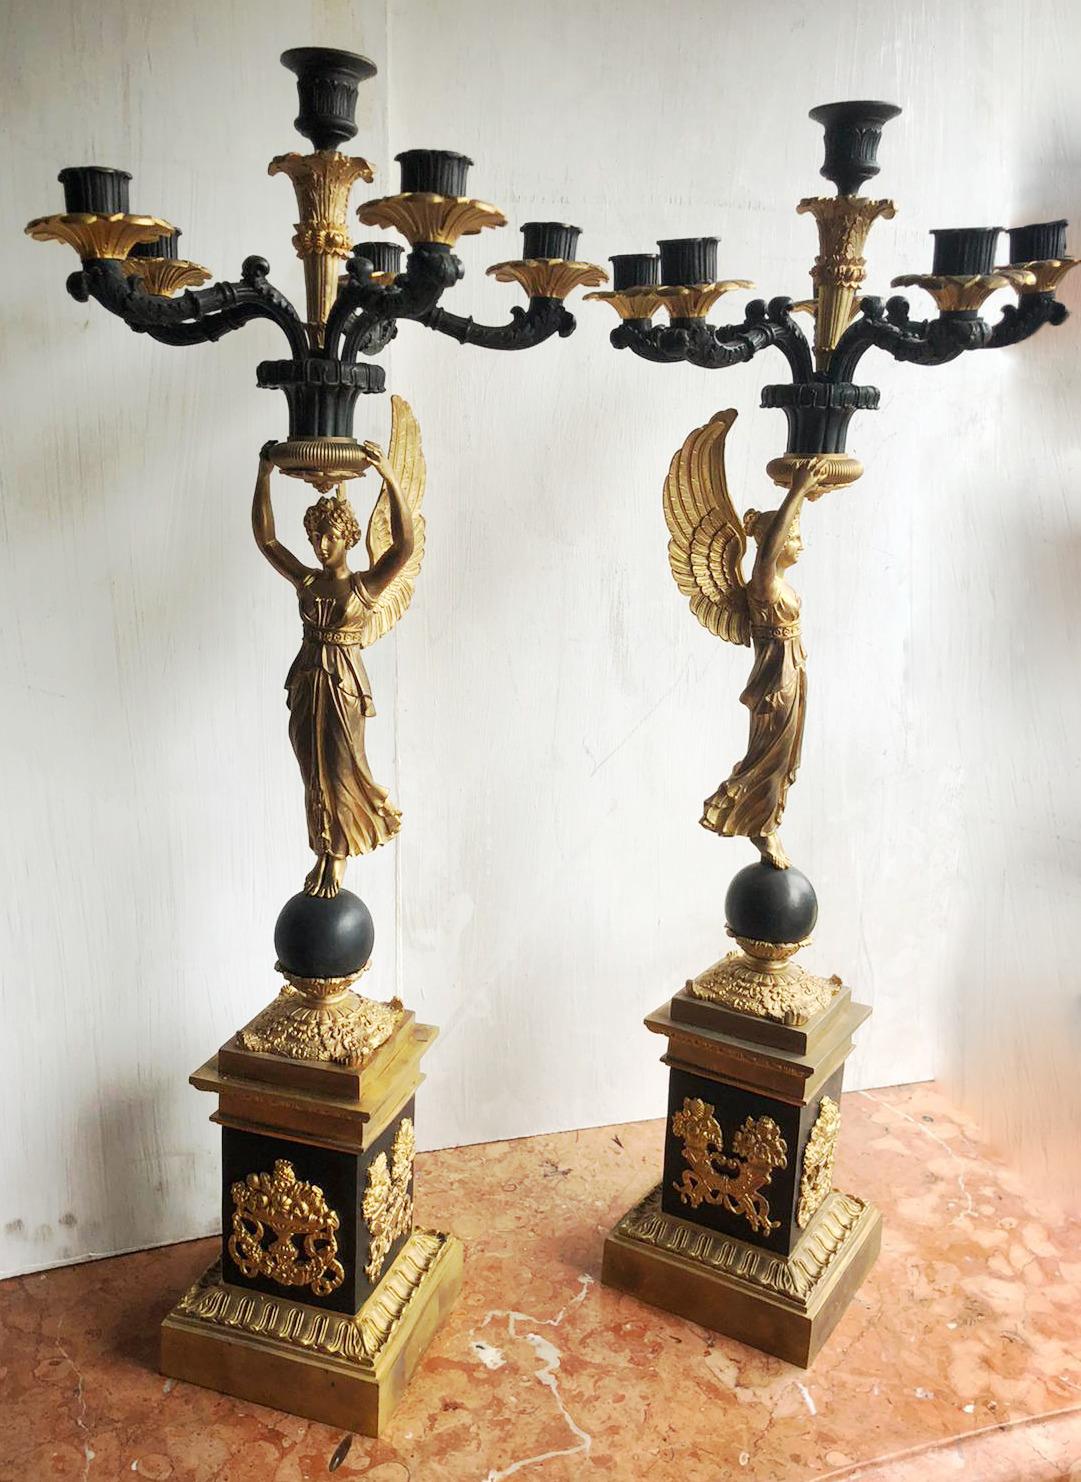 French Provincial French Empires 19th Century Style Gilt Bronze Angel Winged Candelabras